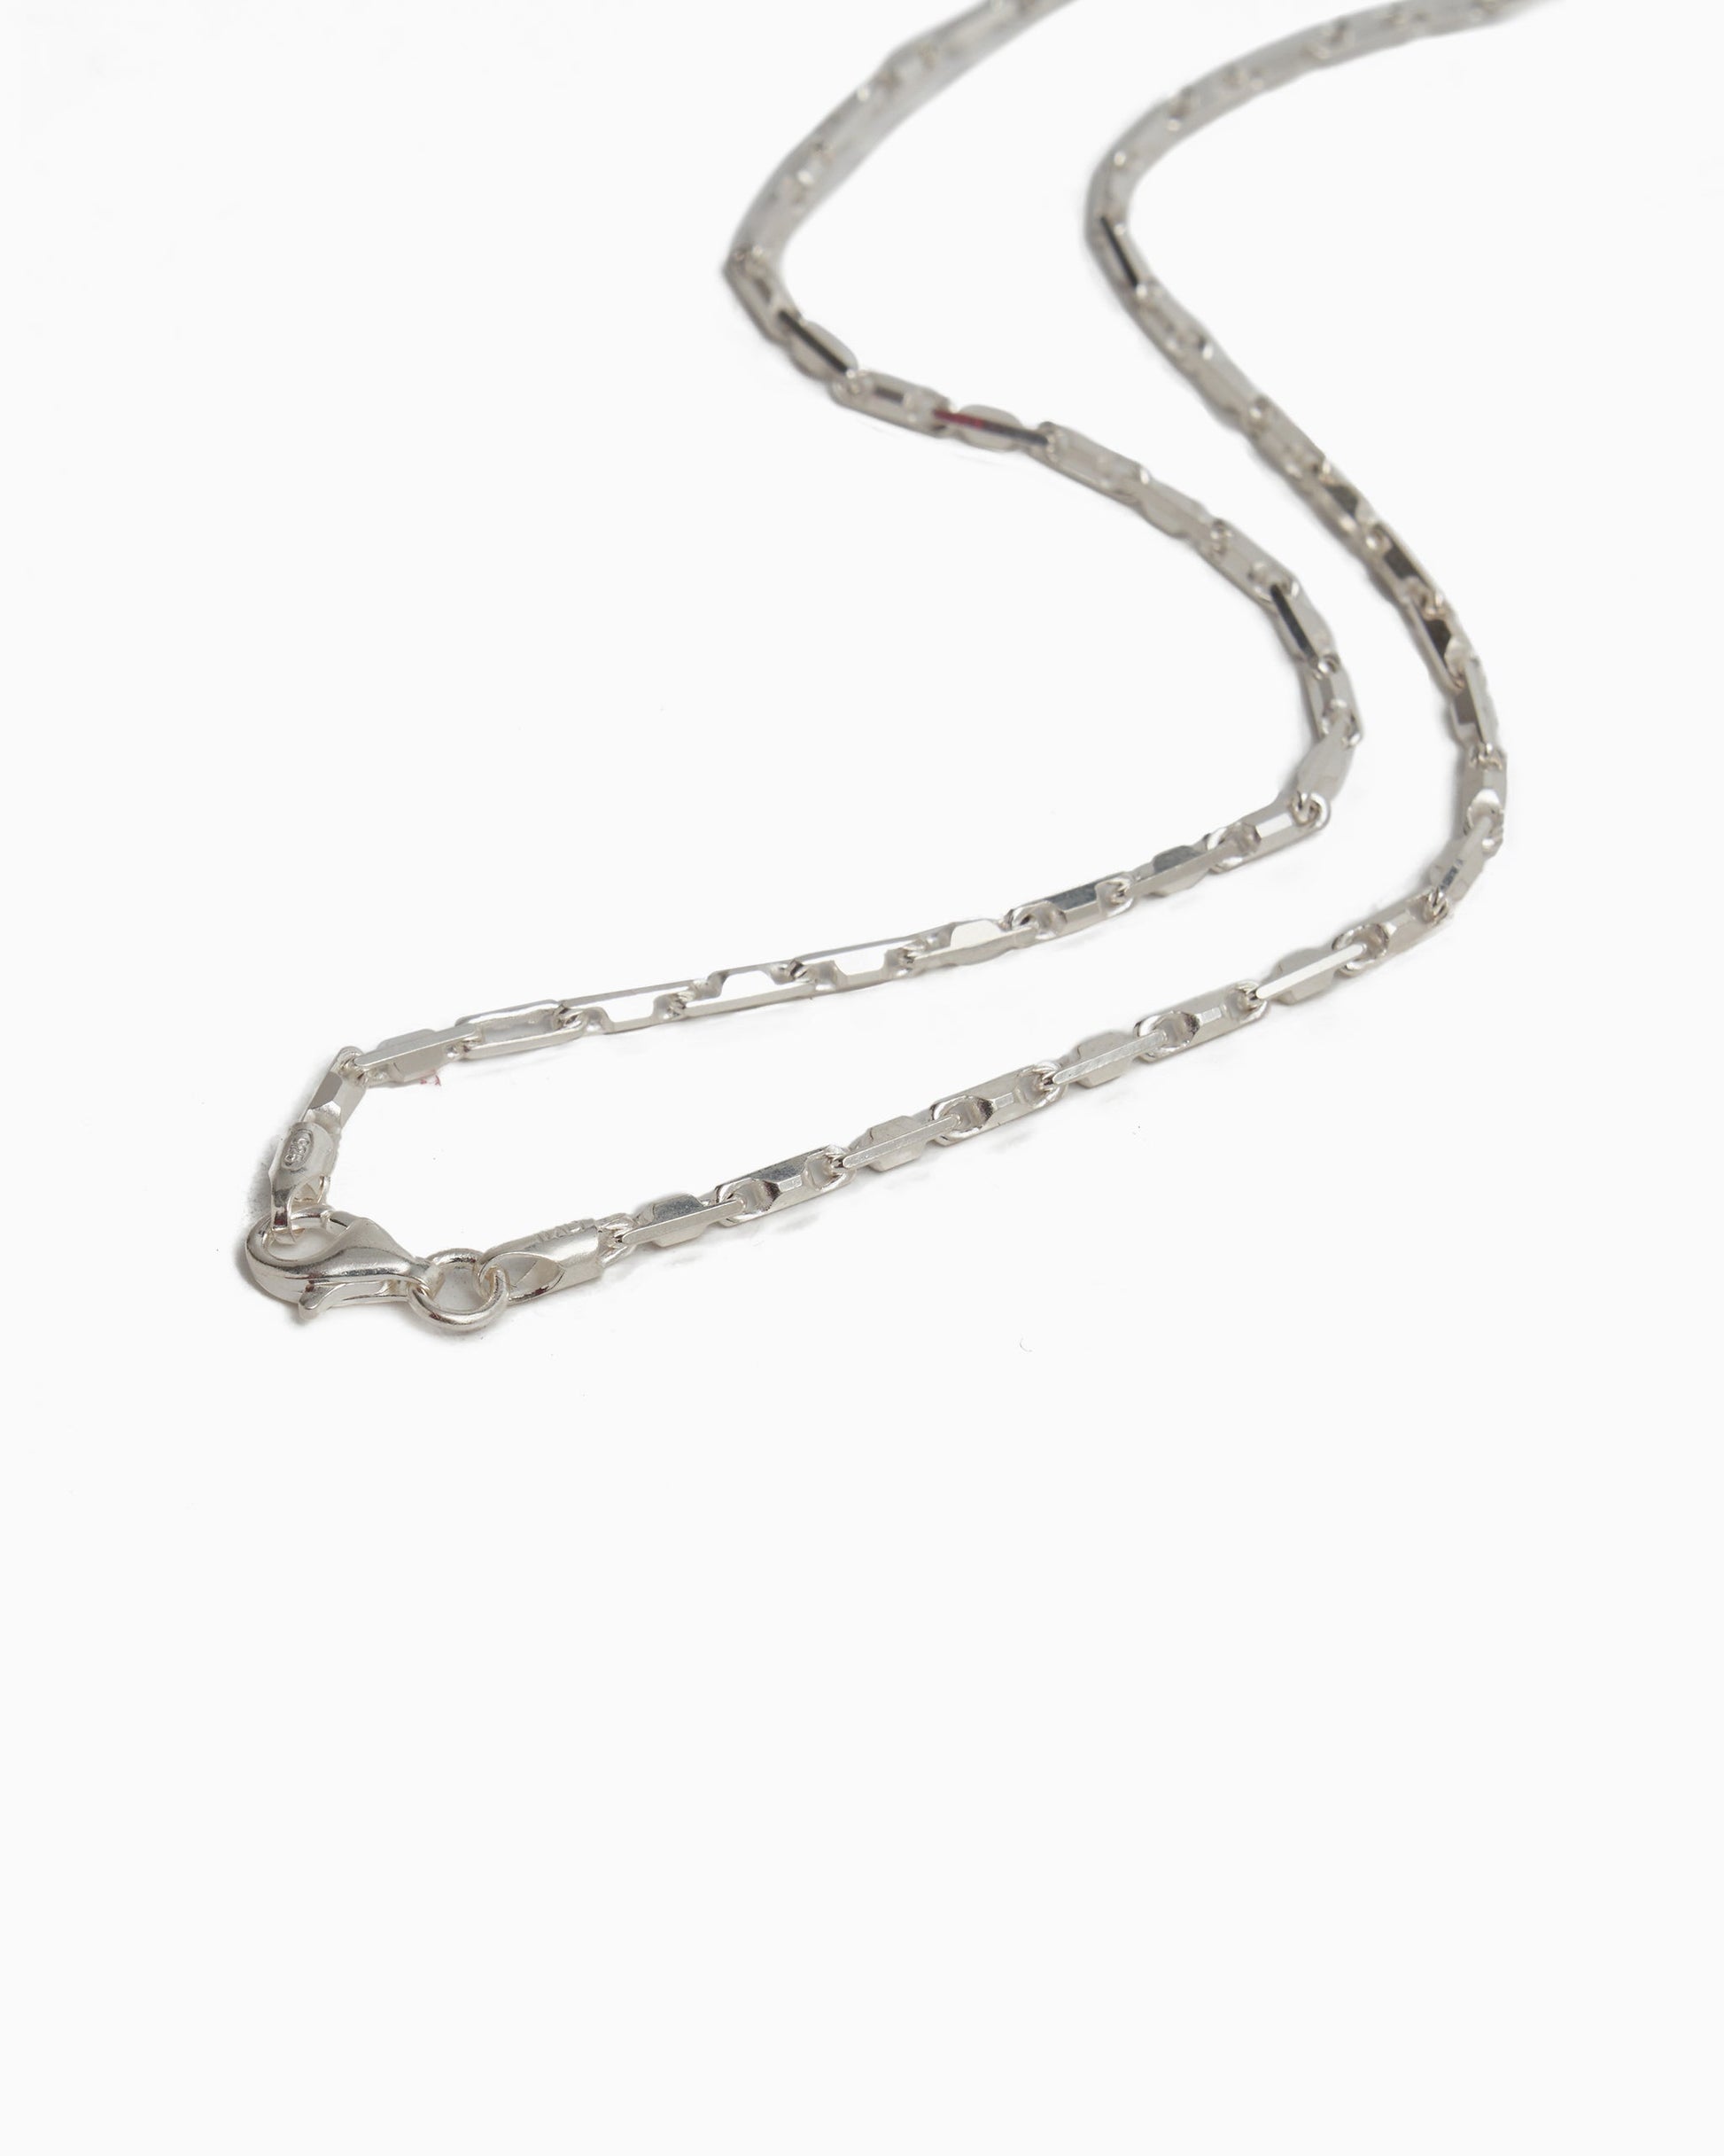 Sterling Silver Everyday Link Chain